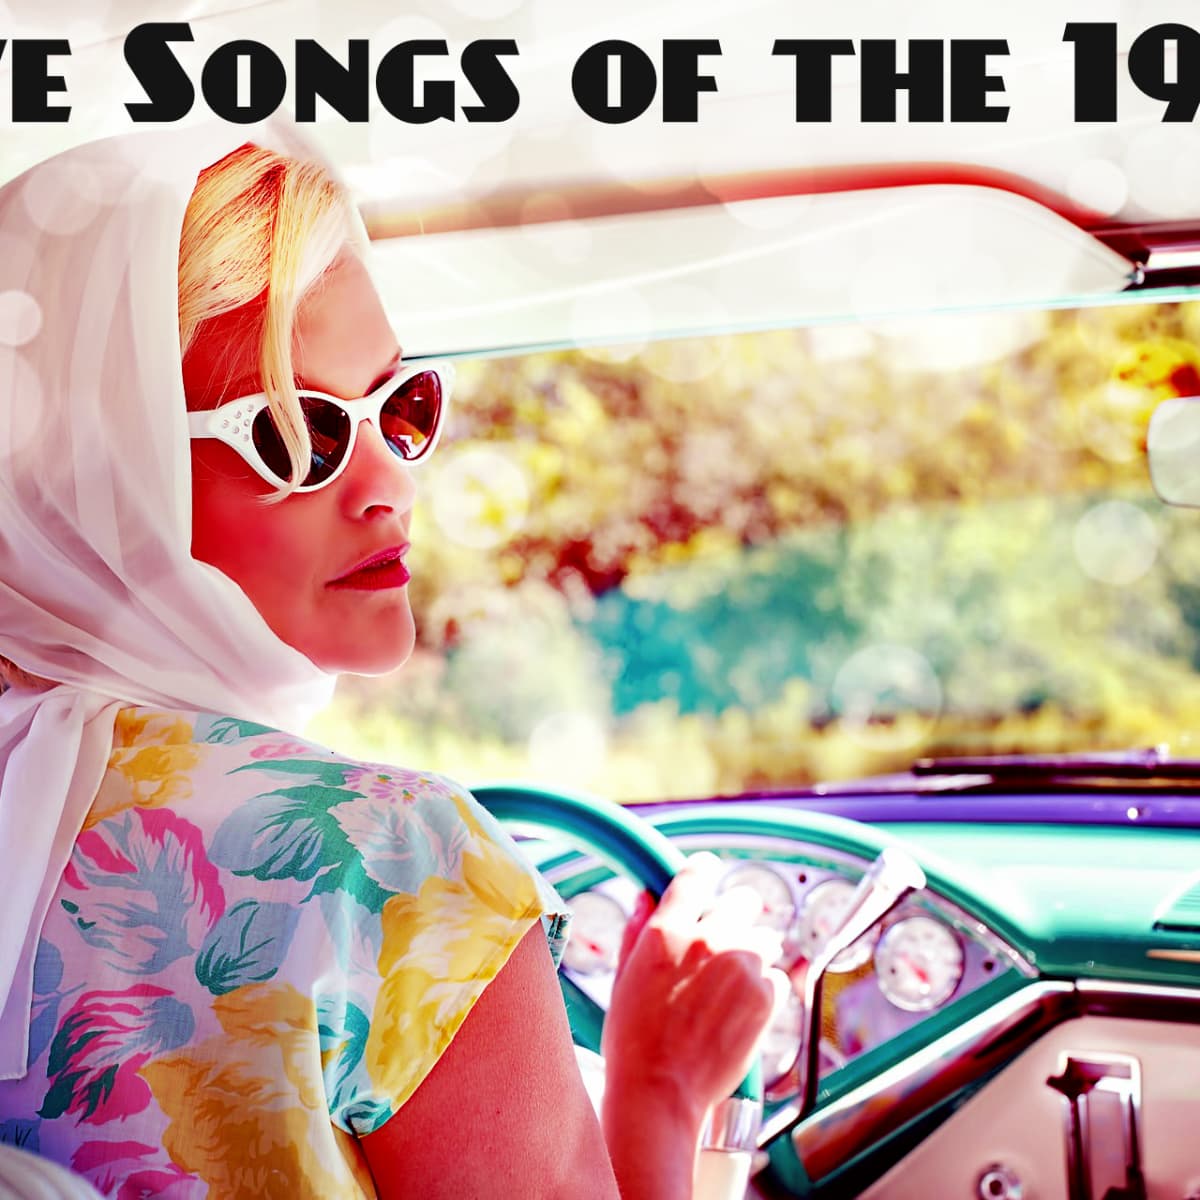 100 Best Rock and Roll Songs of the '50s and '60s - Spinditty